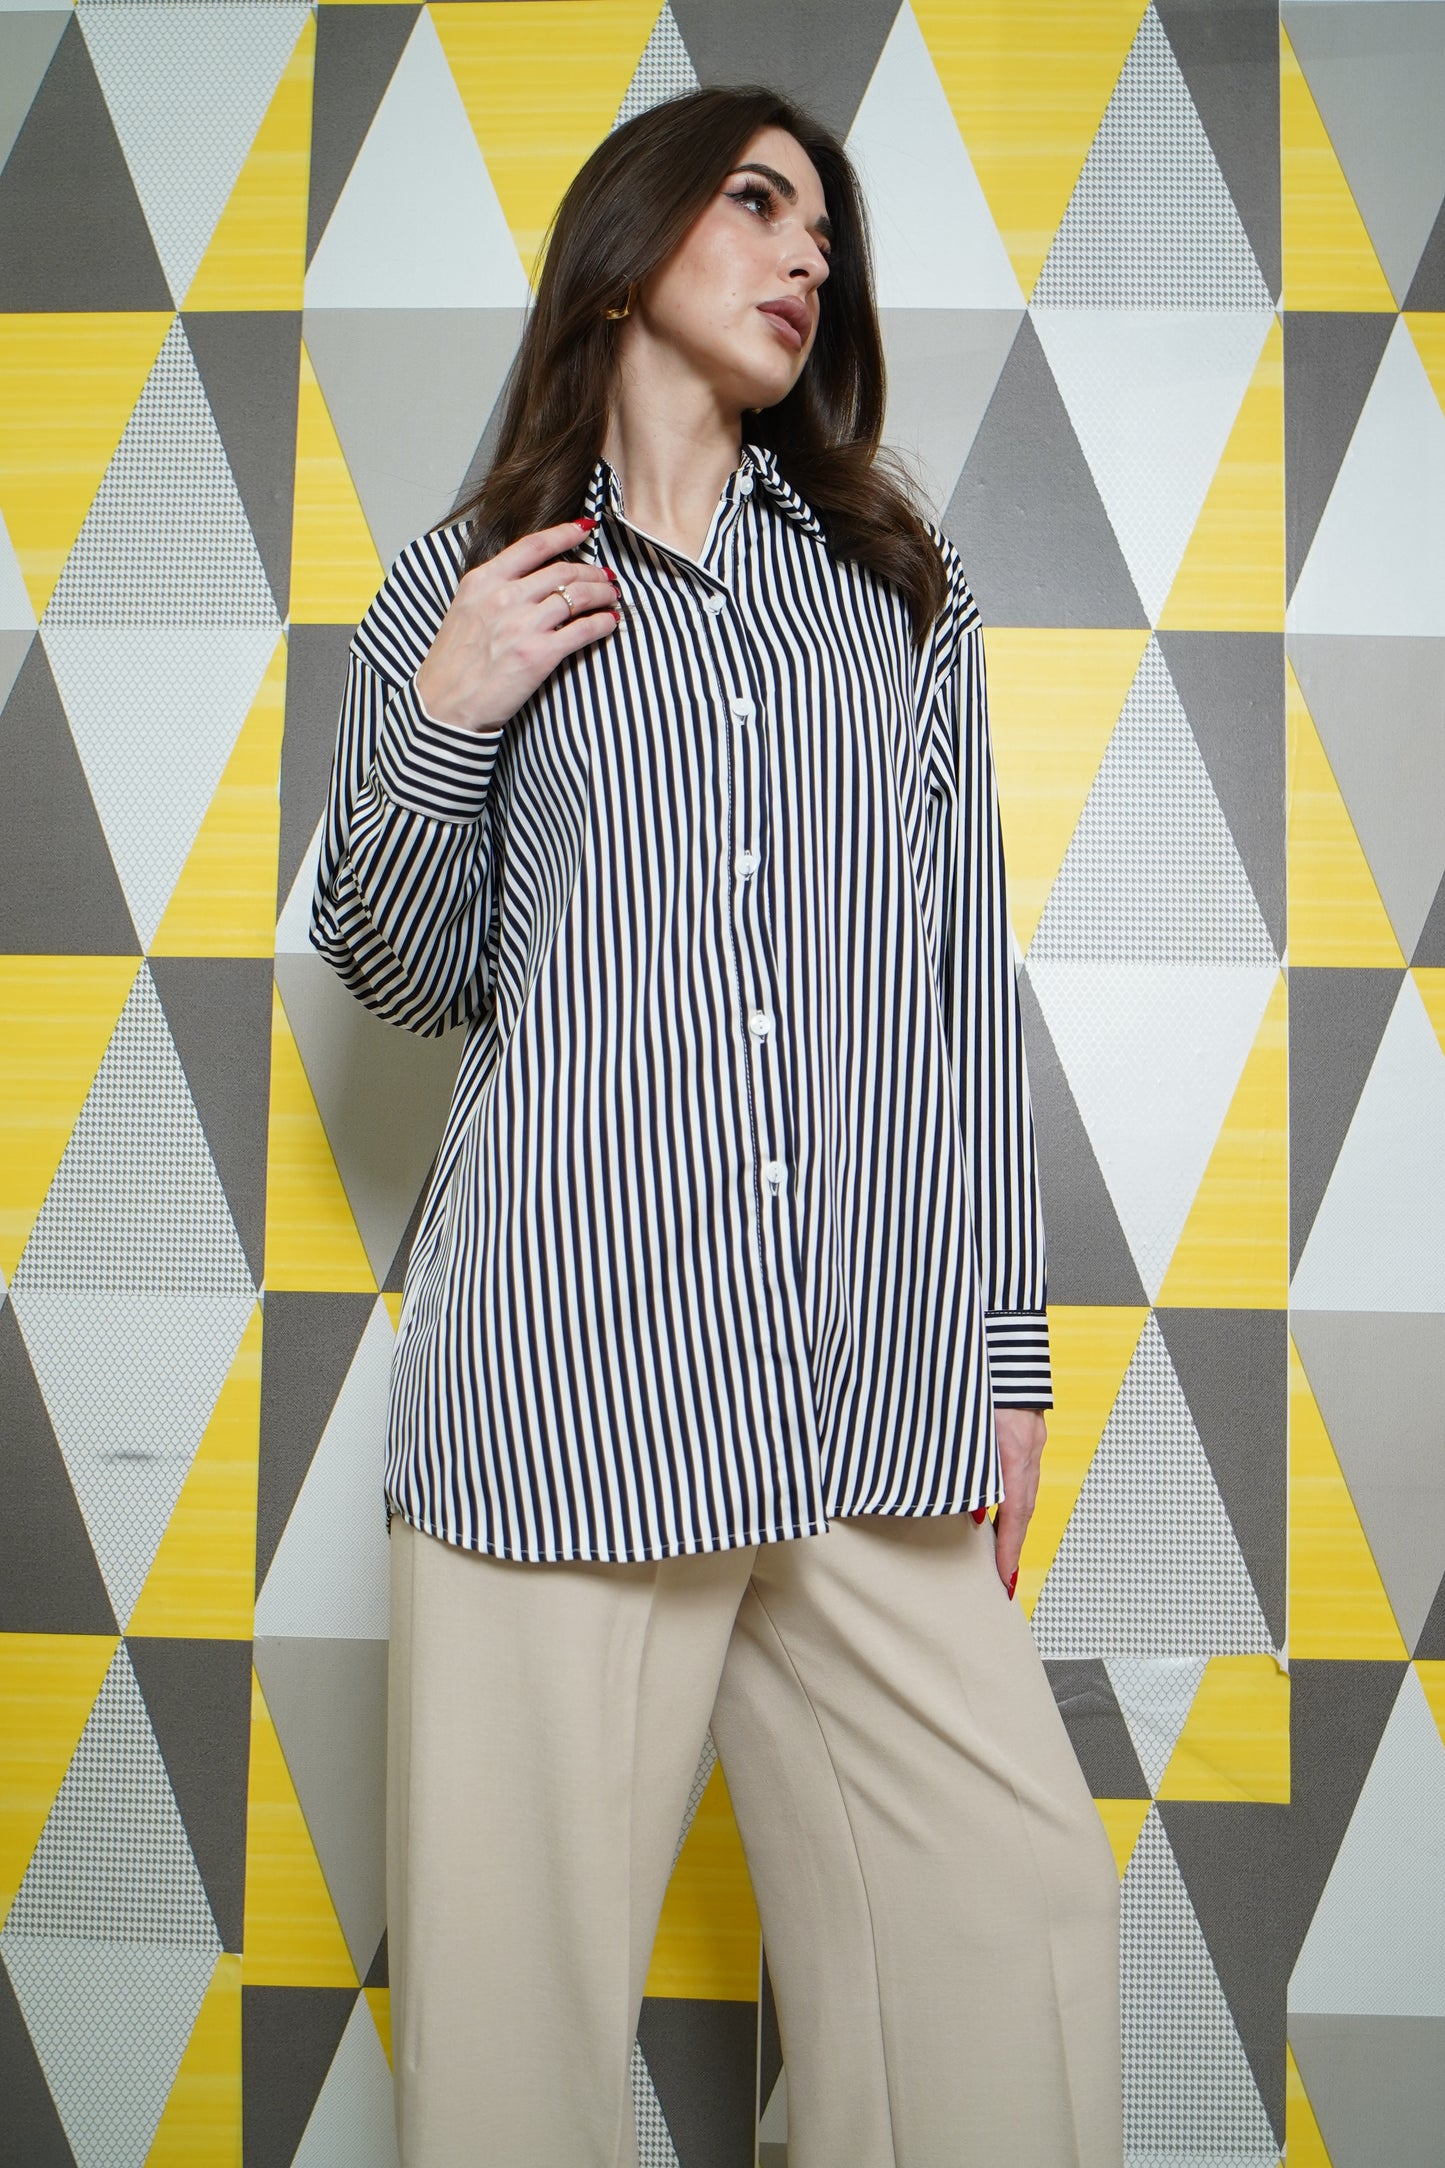 Thick Black Striped Button Down Corporate Shirt